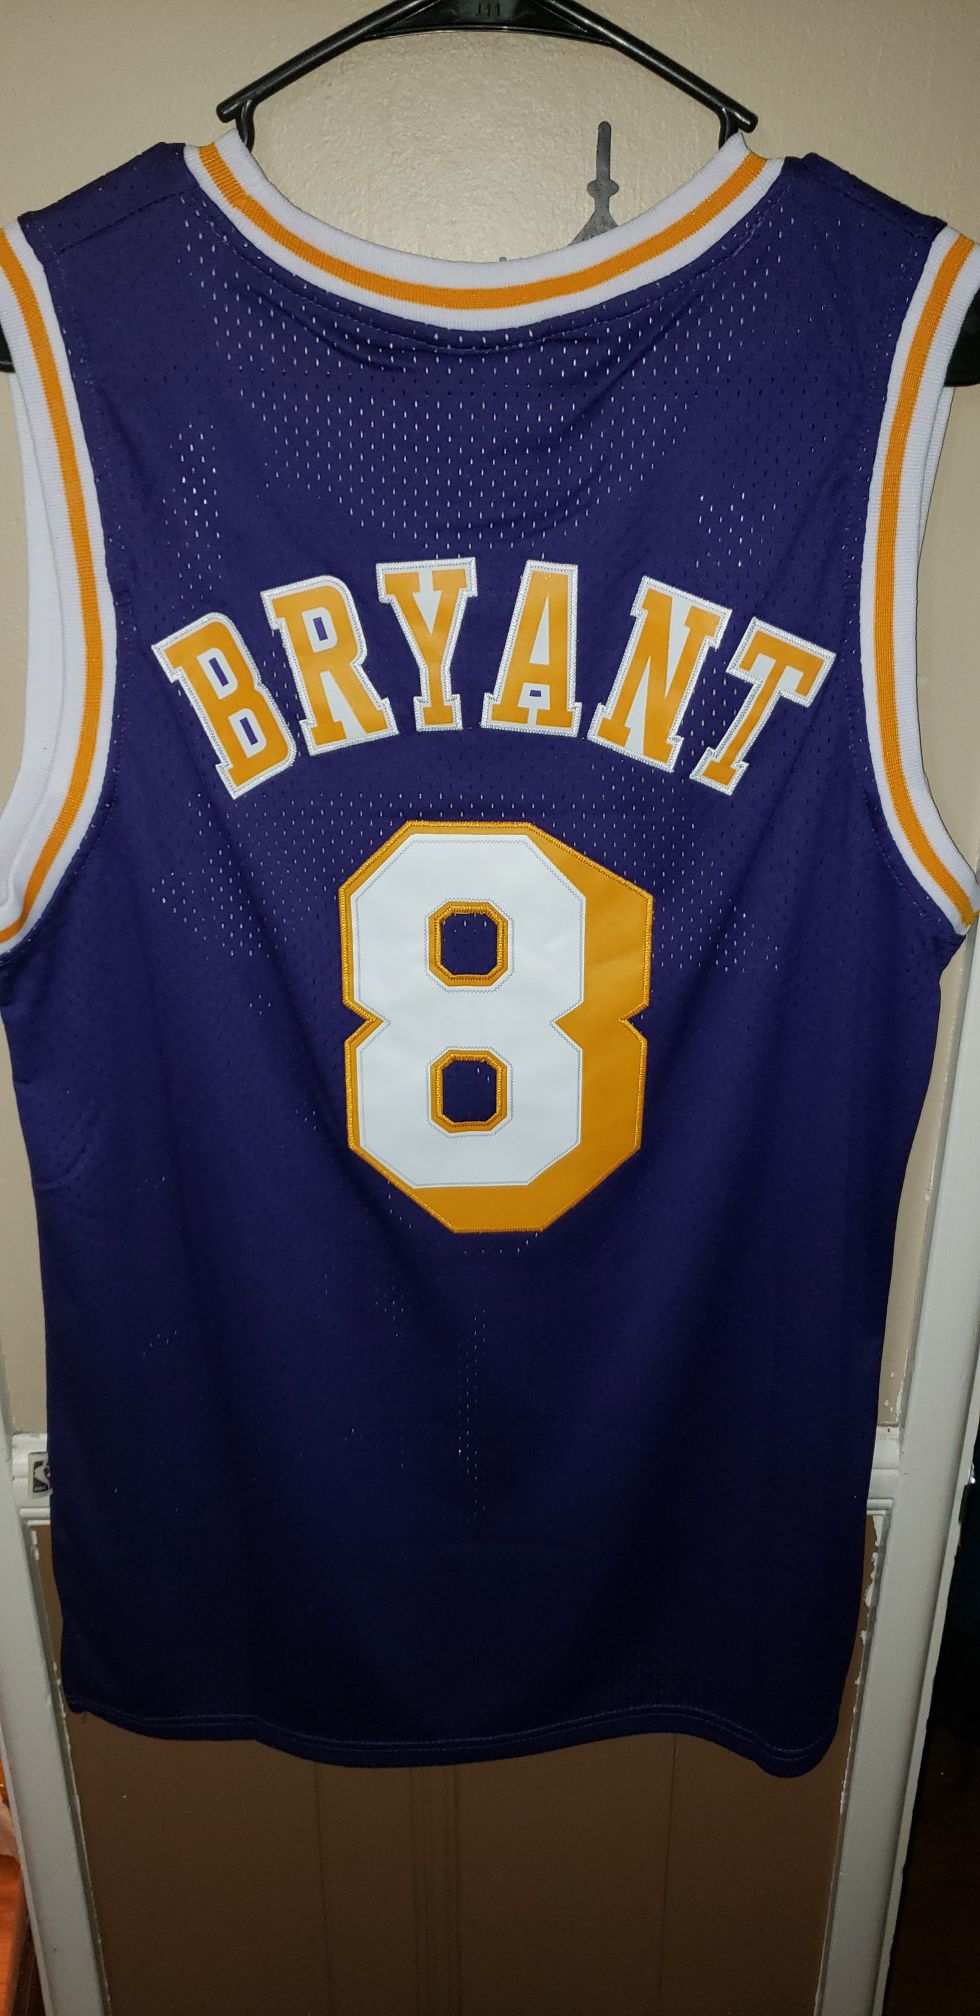 Men's Small Kobe Bryant Los Angeles Lakers Jersey New with Tags Stiched Adidas $45. Ships +$3. Pick up in West Covina